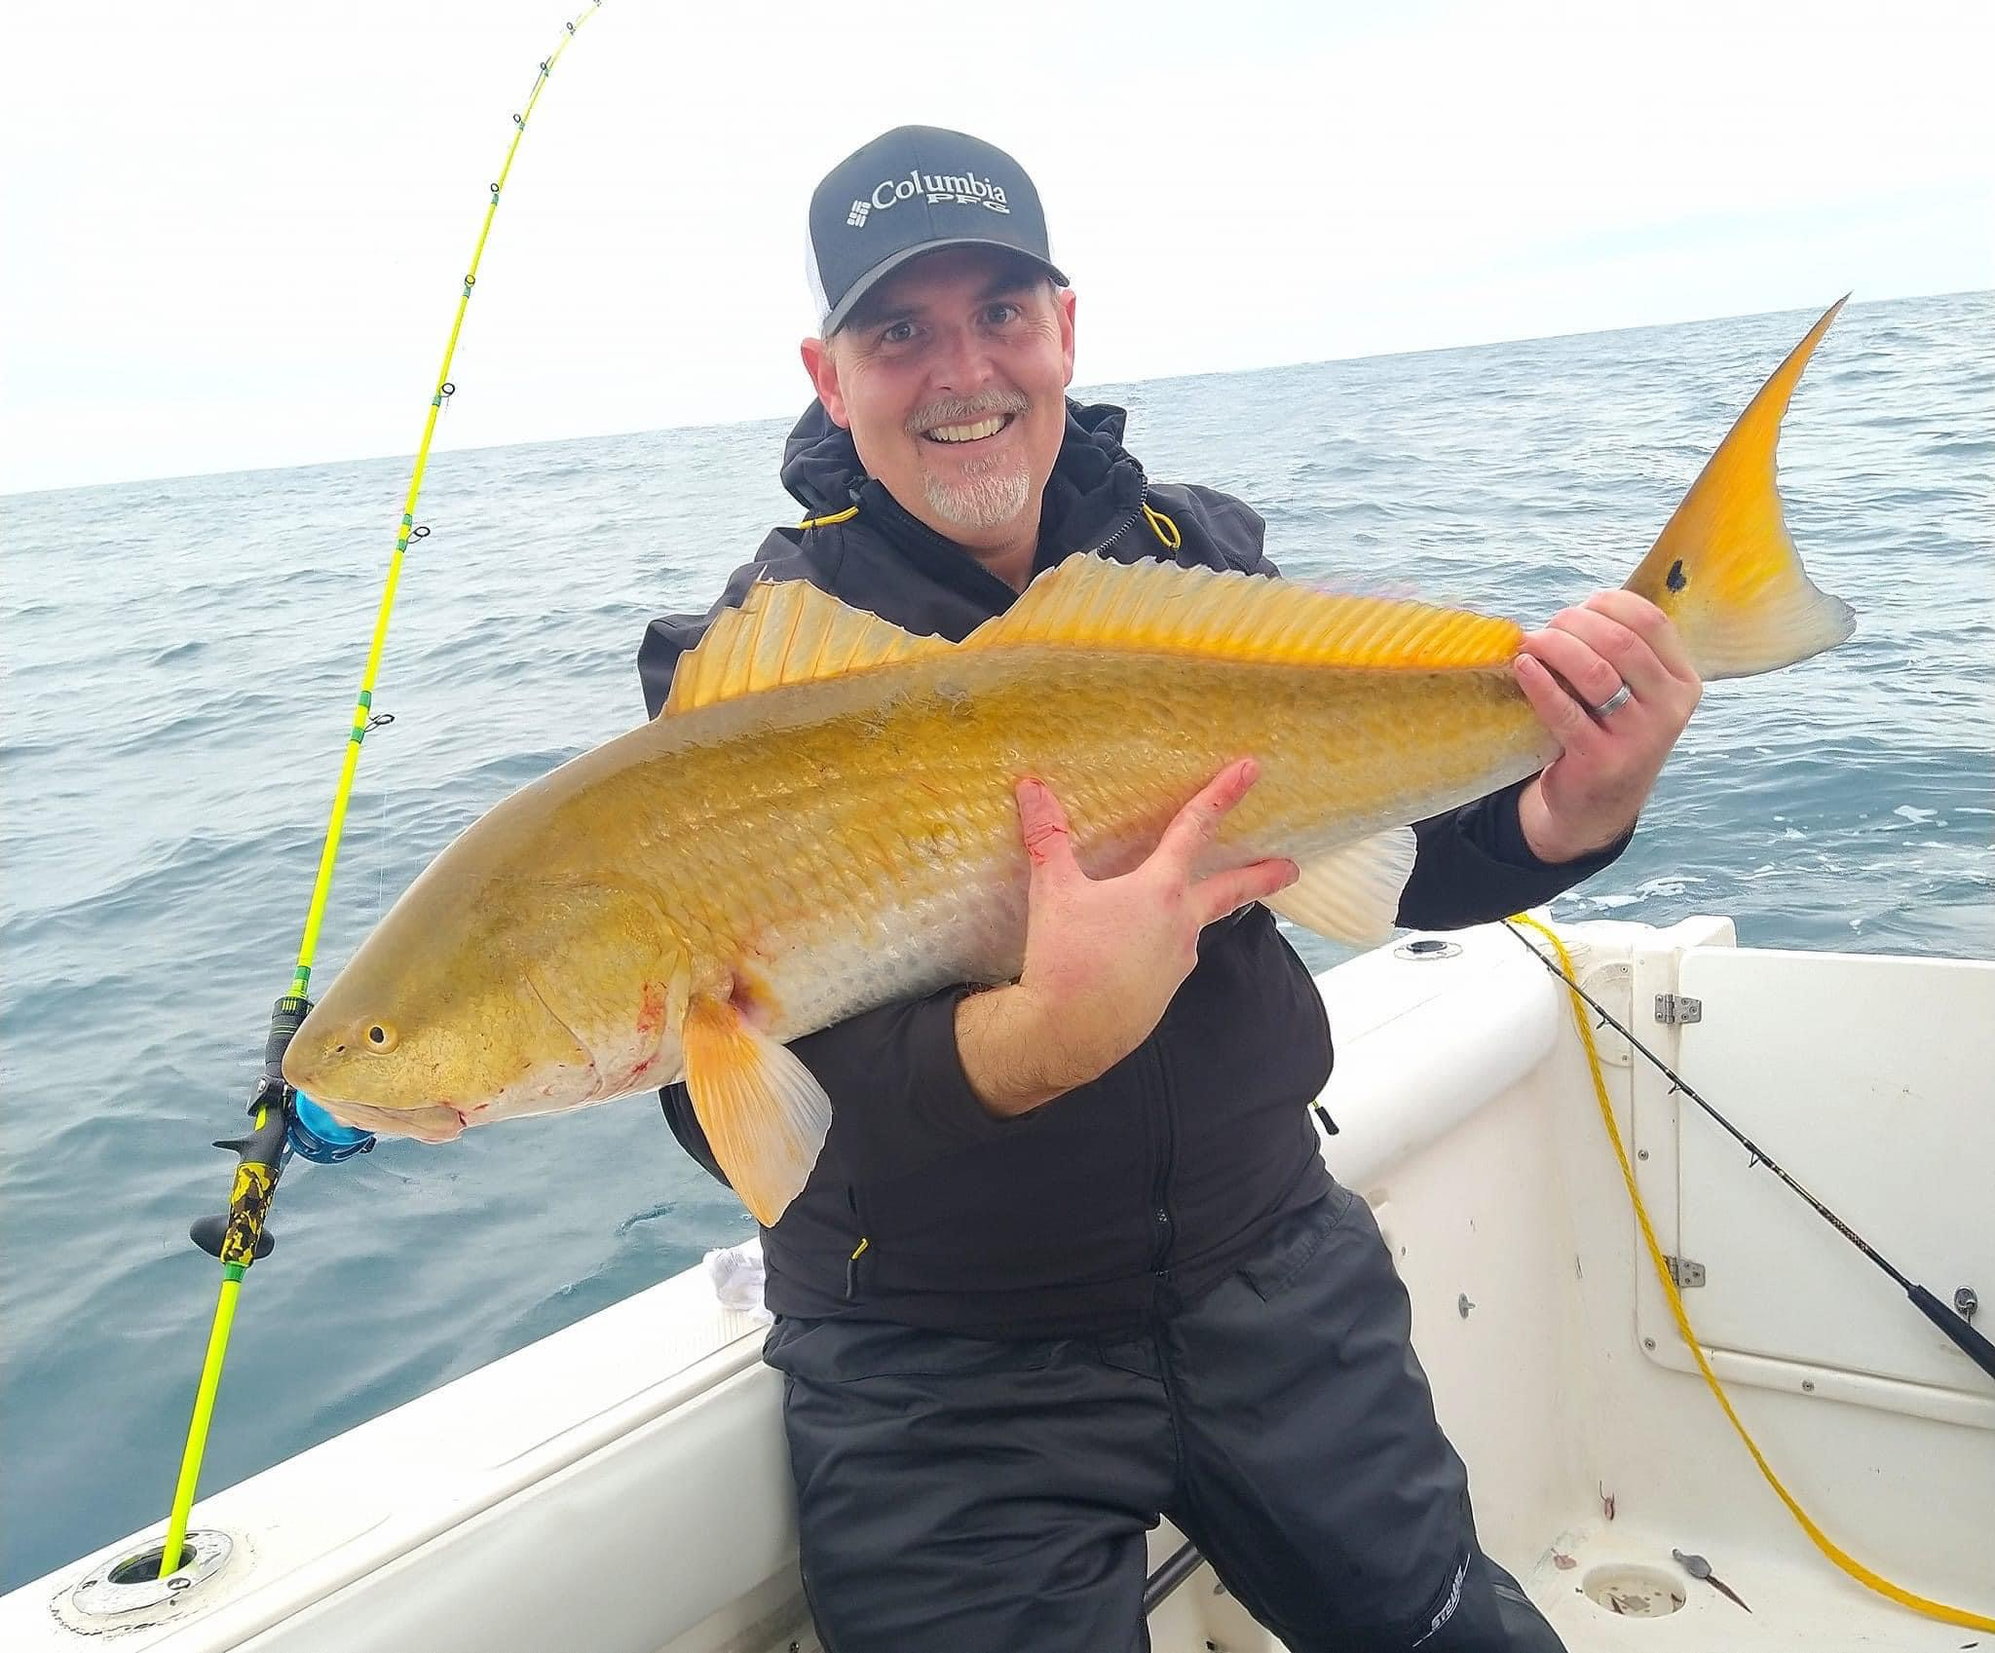 Yellowtail snapper fishing. Circle hooks - The Hull Truth - Boating and  Fishing Forum